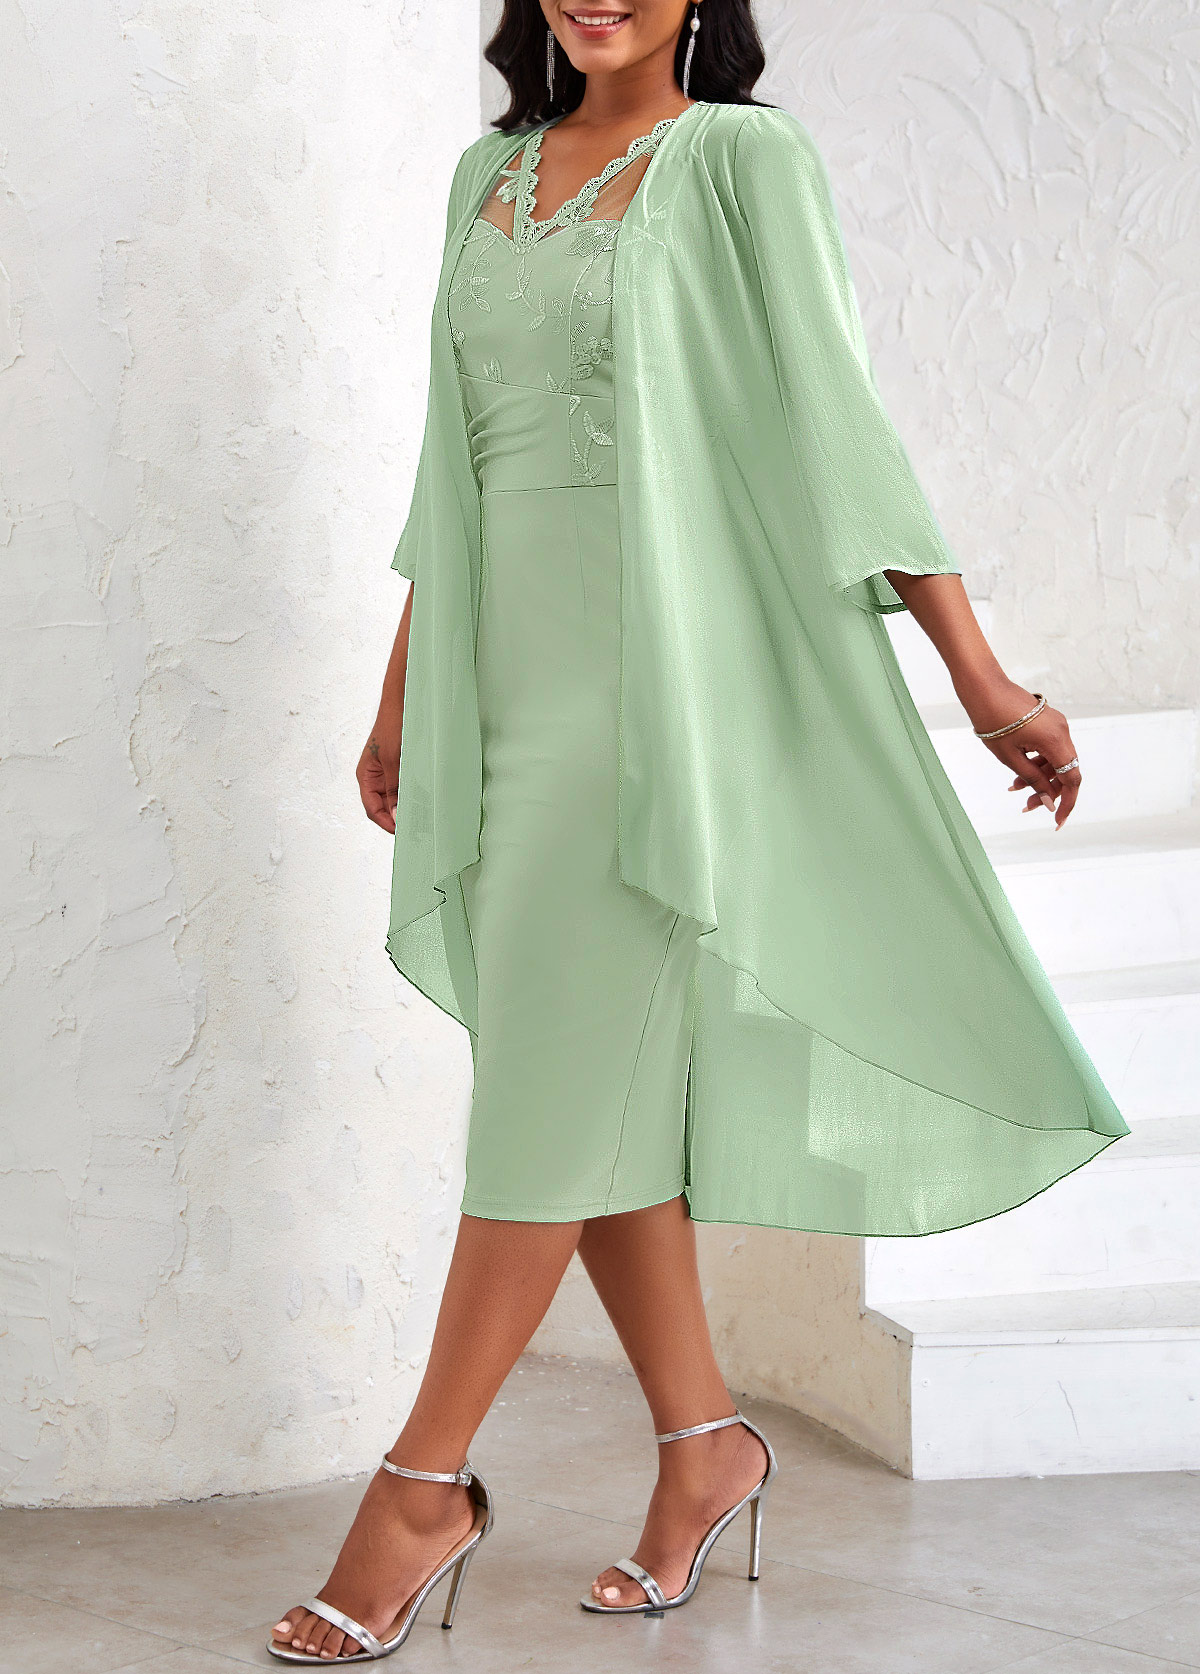 Embroidery Two Piece Suit Light Green Dress and Cardigan